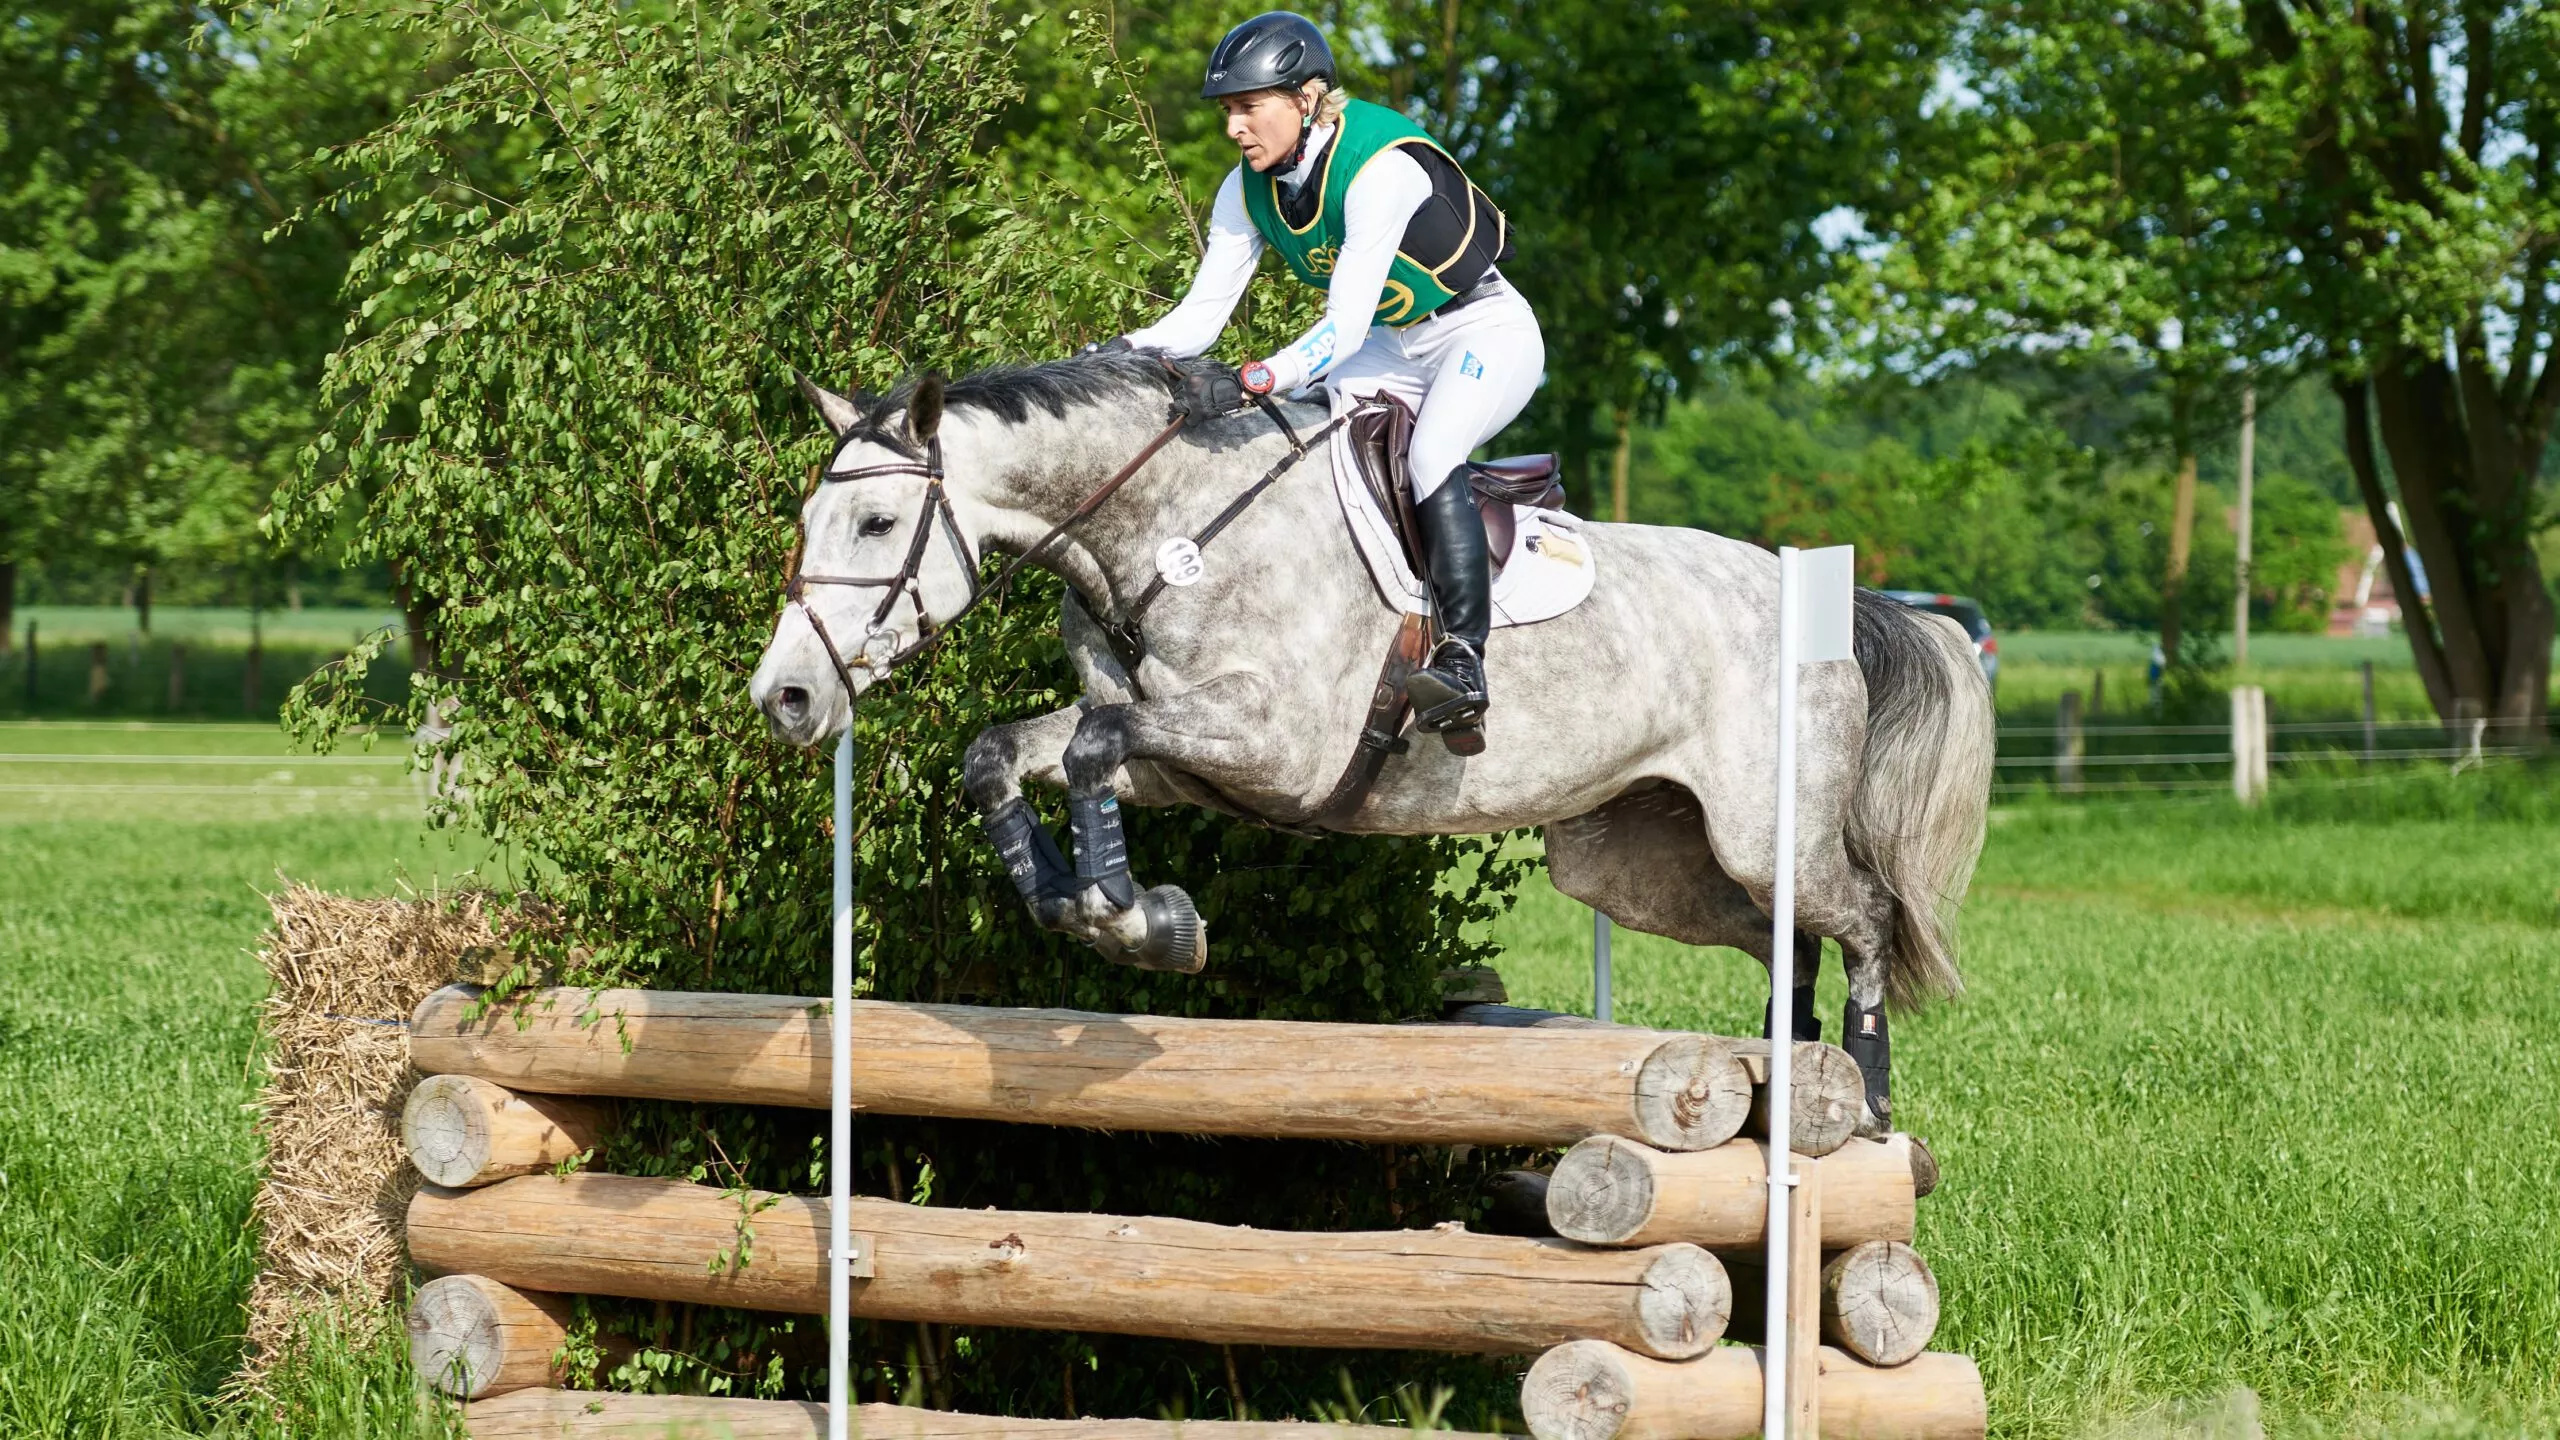 Eventing: Cross-country jumping with horses, A test for endurance, skill and agility. 2560x1440 HD Wallpaper.